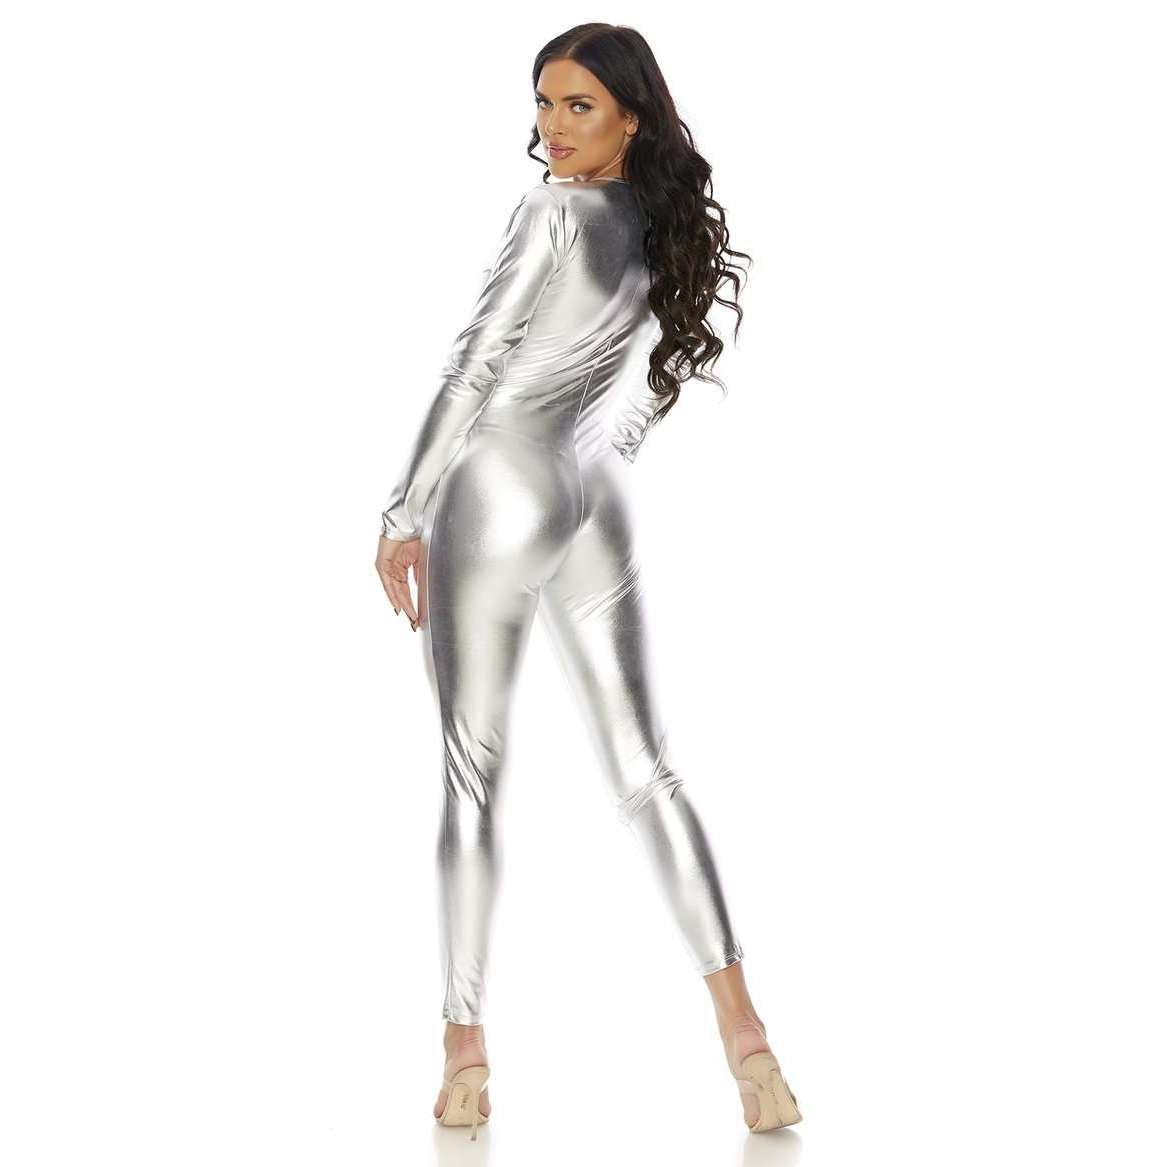 Shiny Zip Front Sexy Catsuit Adult Costume